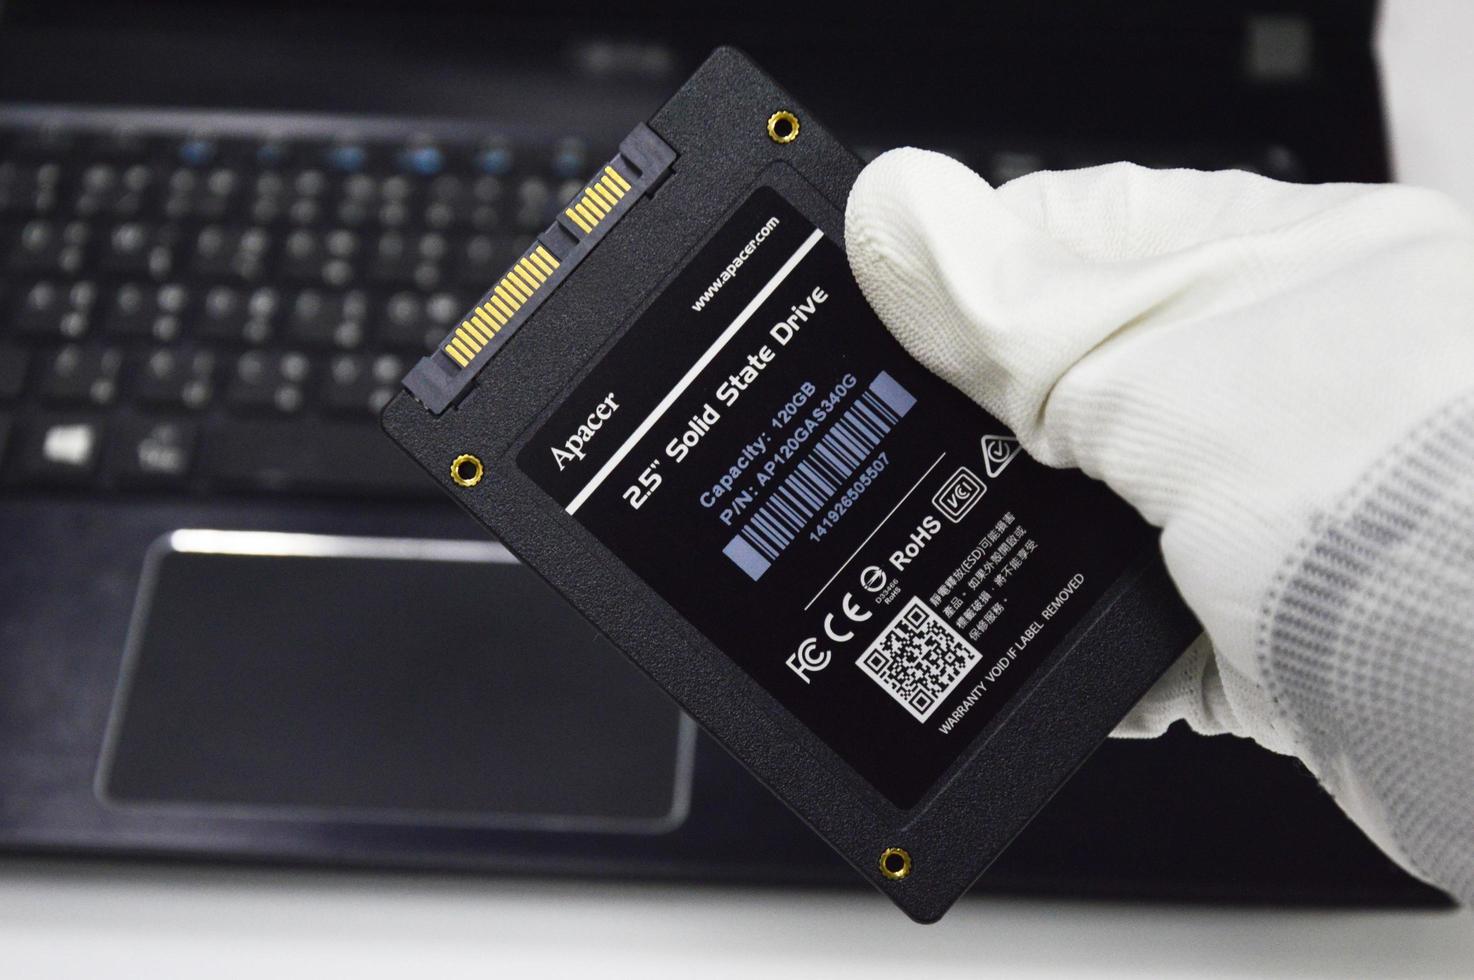 31-8-2022, Chonburi, Thailand, 2.5-inch SSD hard drive, black, Apacer brand, widely used. photo